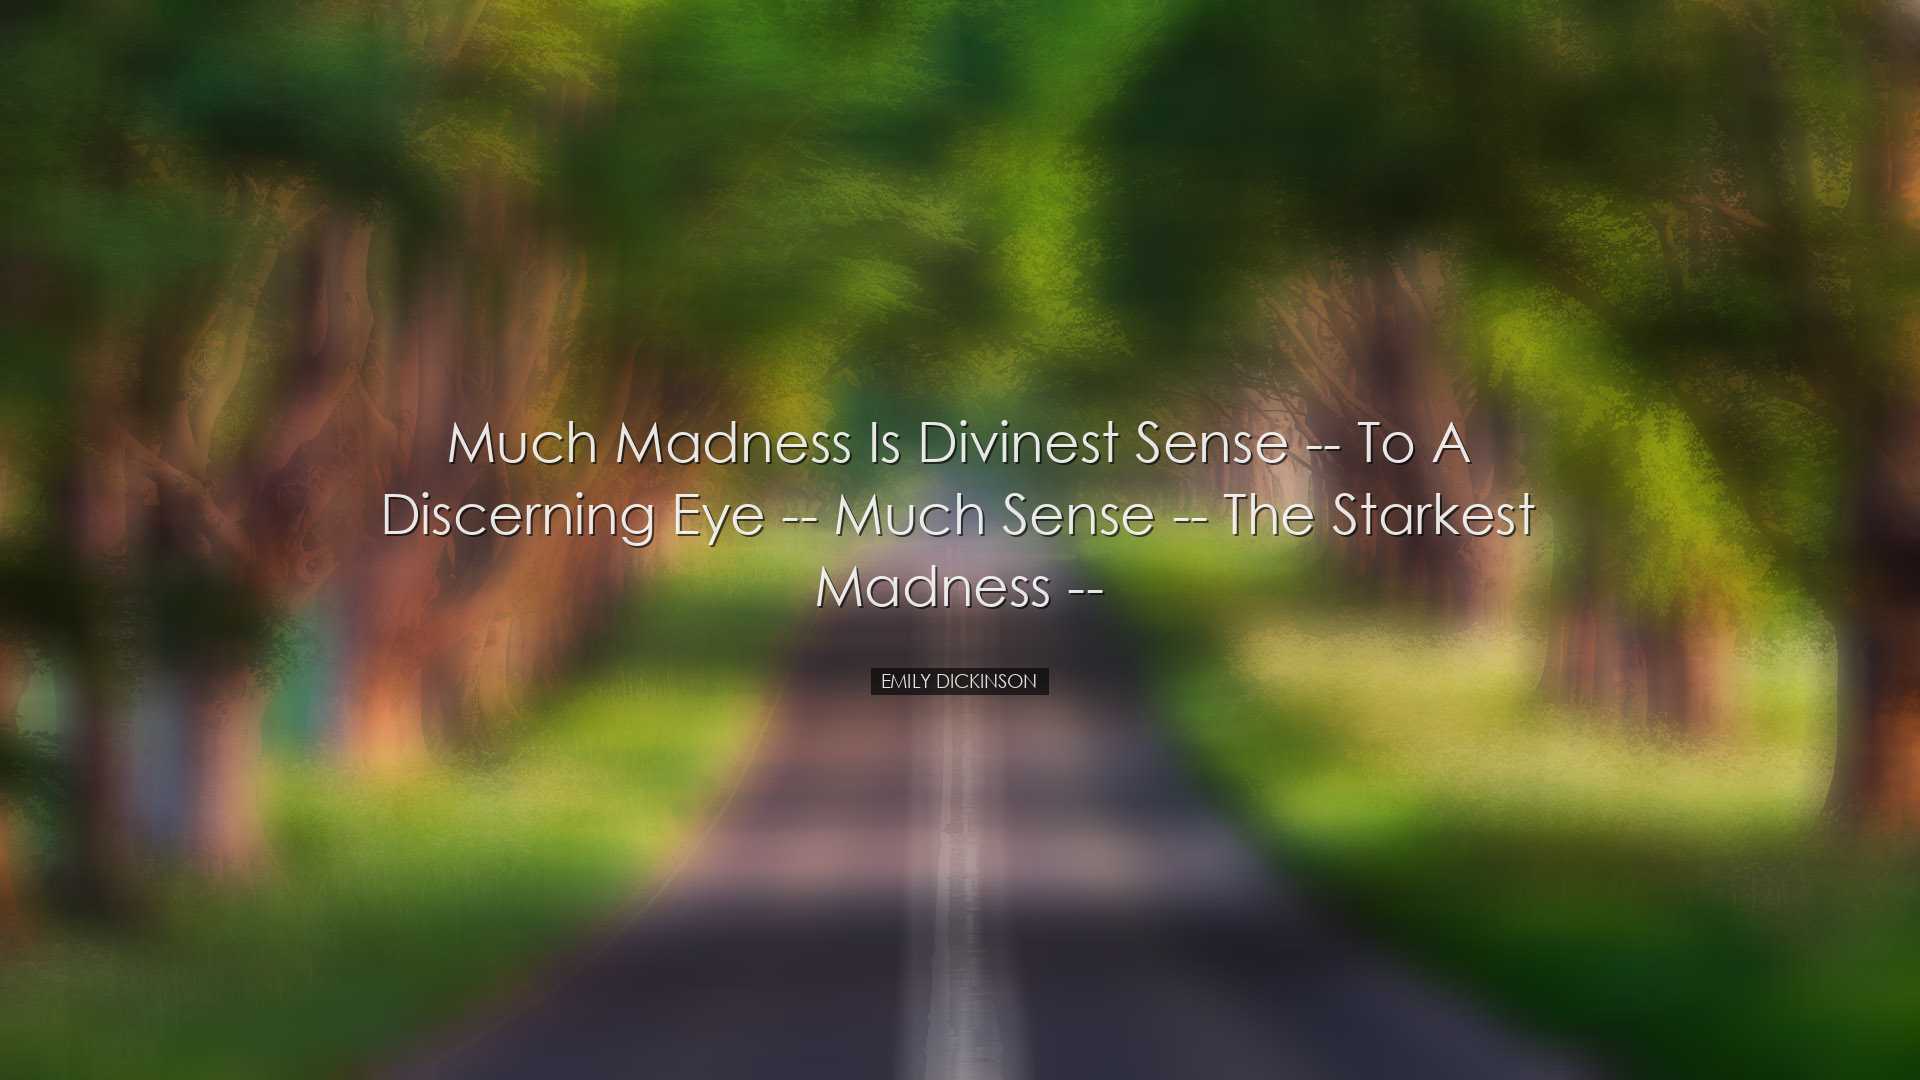 Much Madness is divinest Sense -- to a discerning Eye -- much Sens